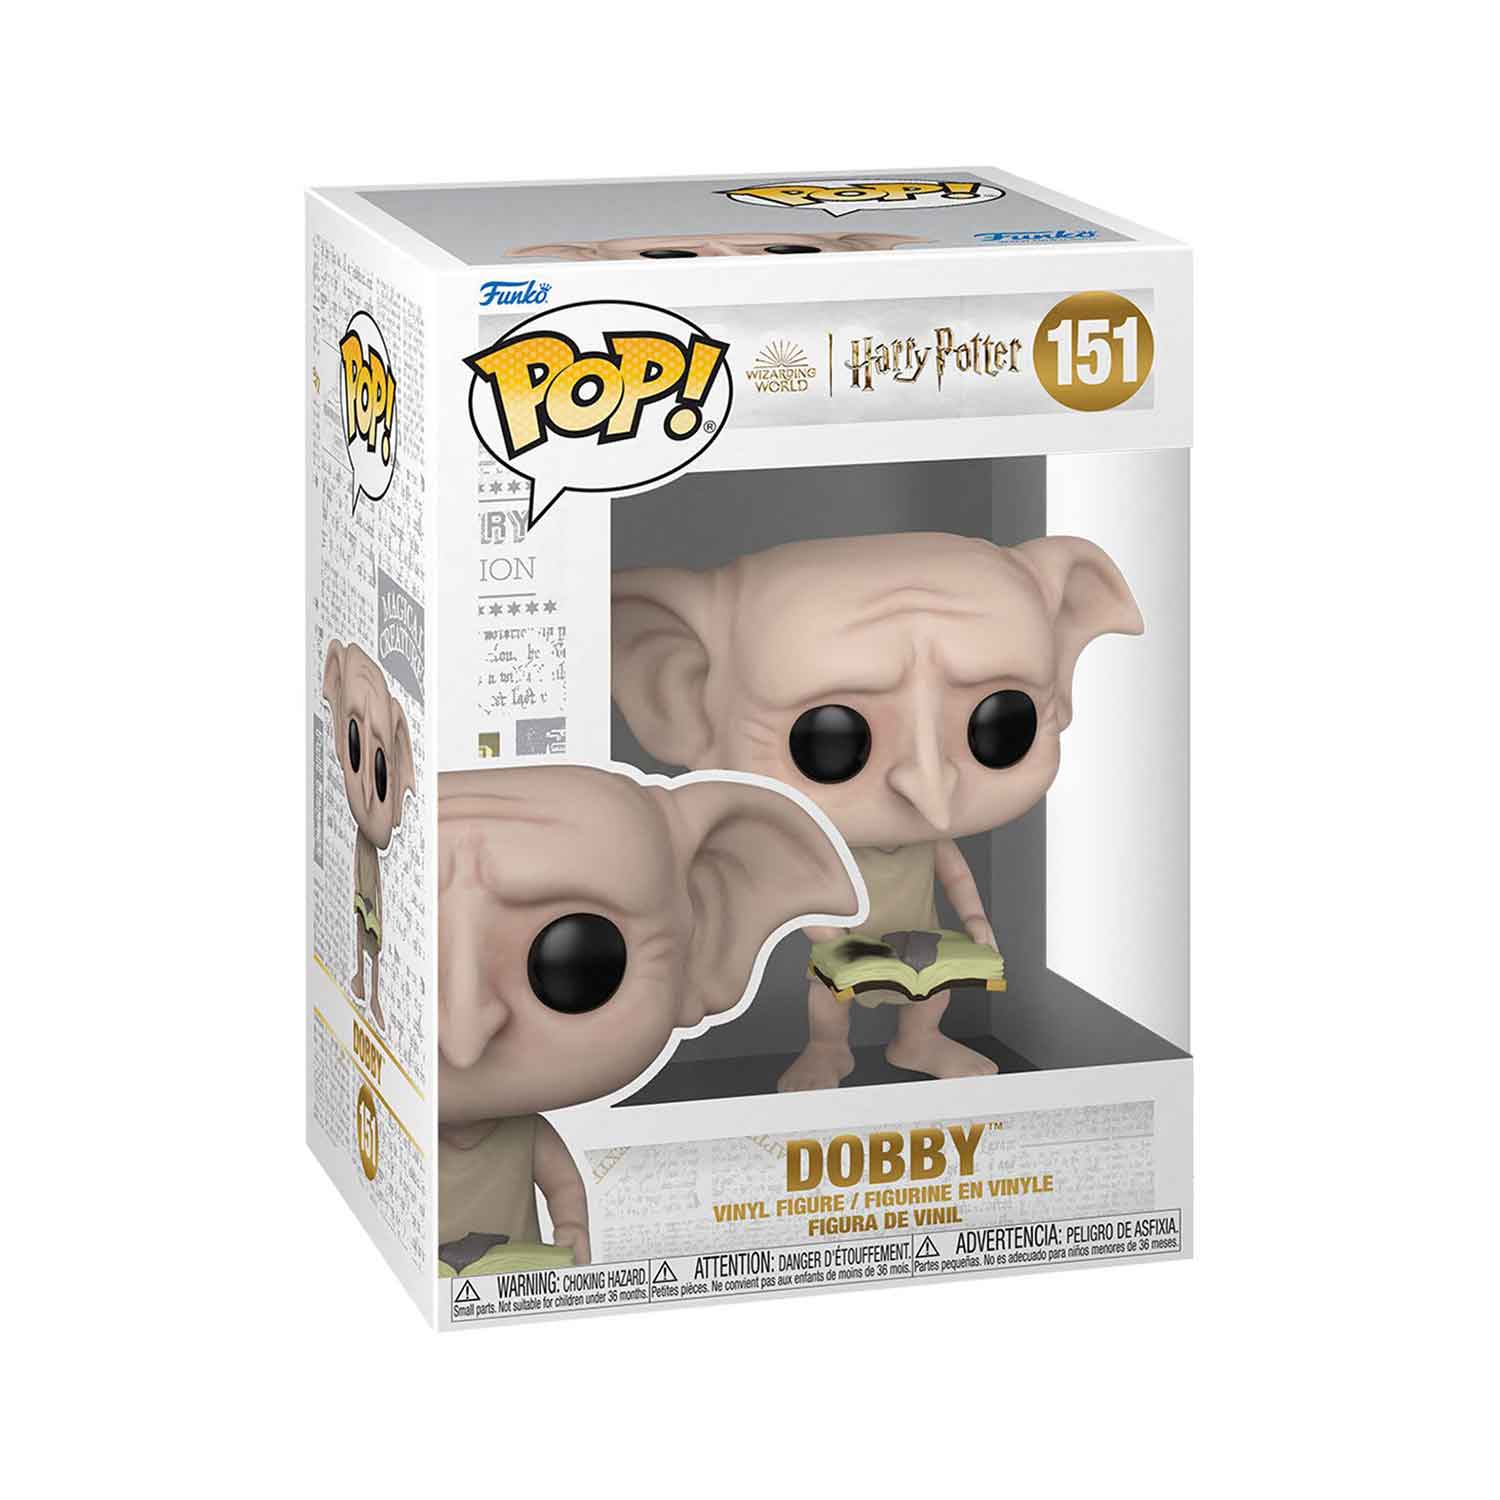 Dobby Harry Potter sixth scale action figure